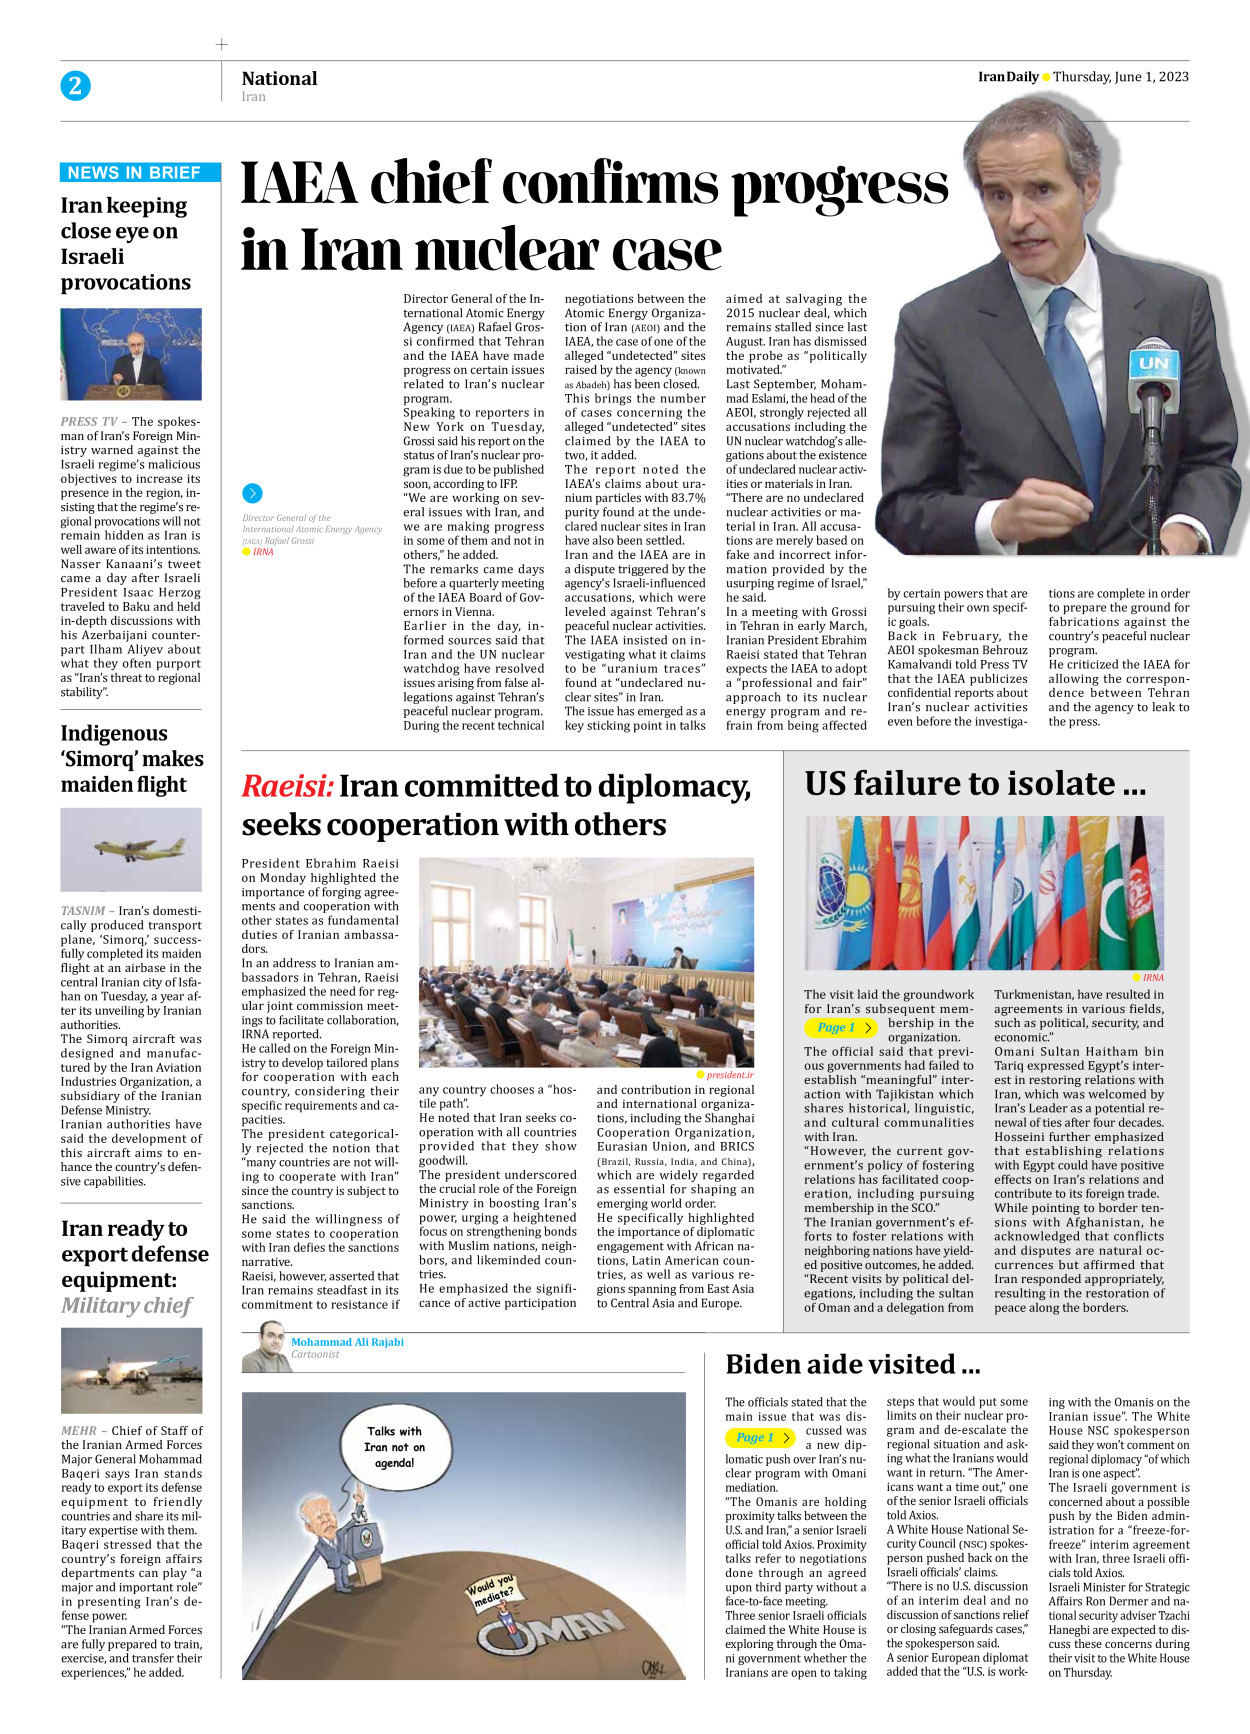 Iran Daily - Number Seven Thousand Three Hundred and Six - 01 June 2023 - Page 2